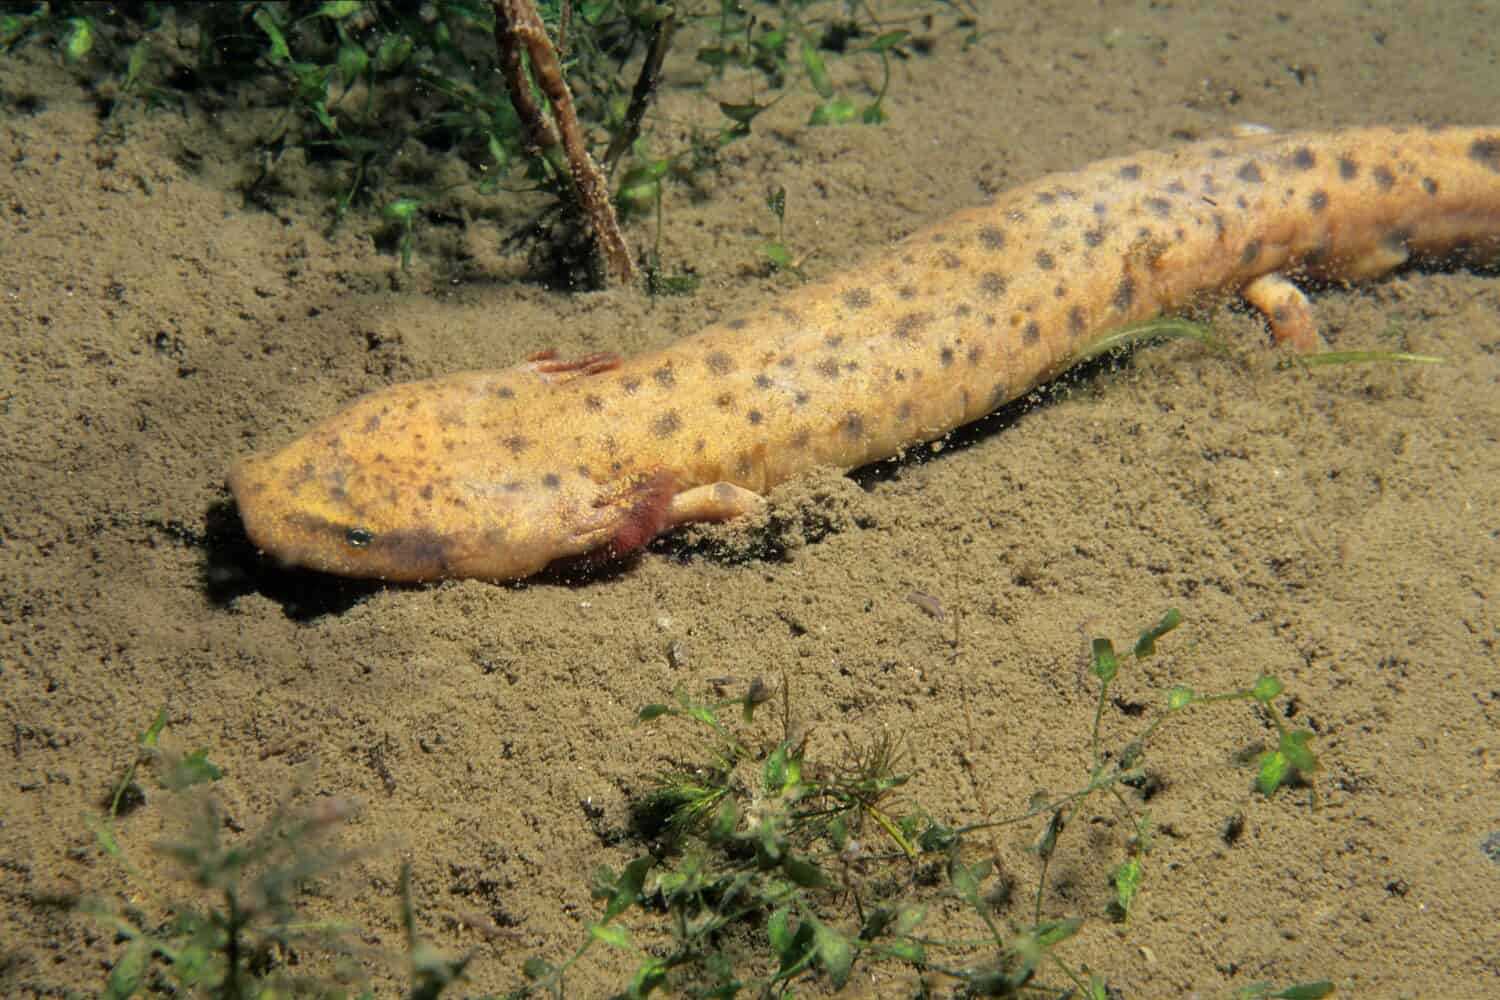 Mudpuppy salamander underwater in the St. Lawrence River.